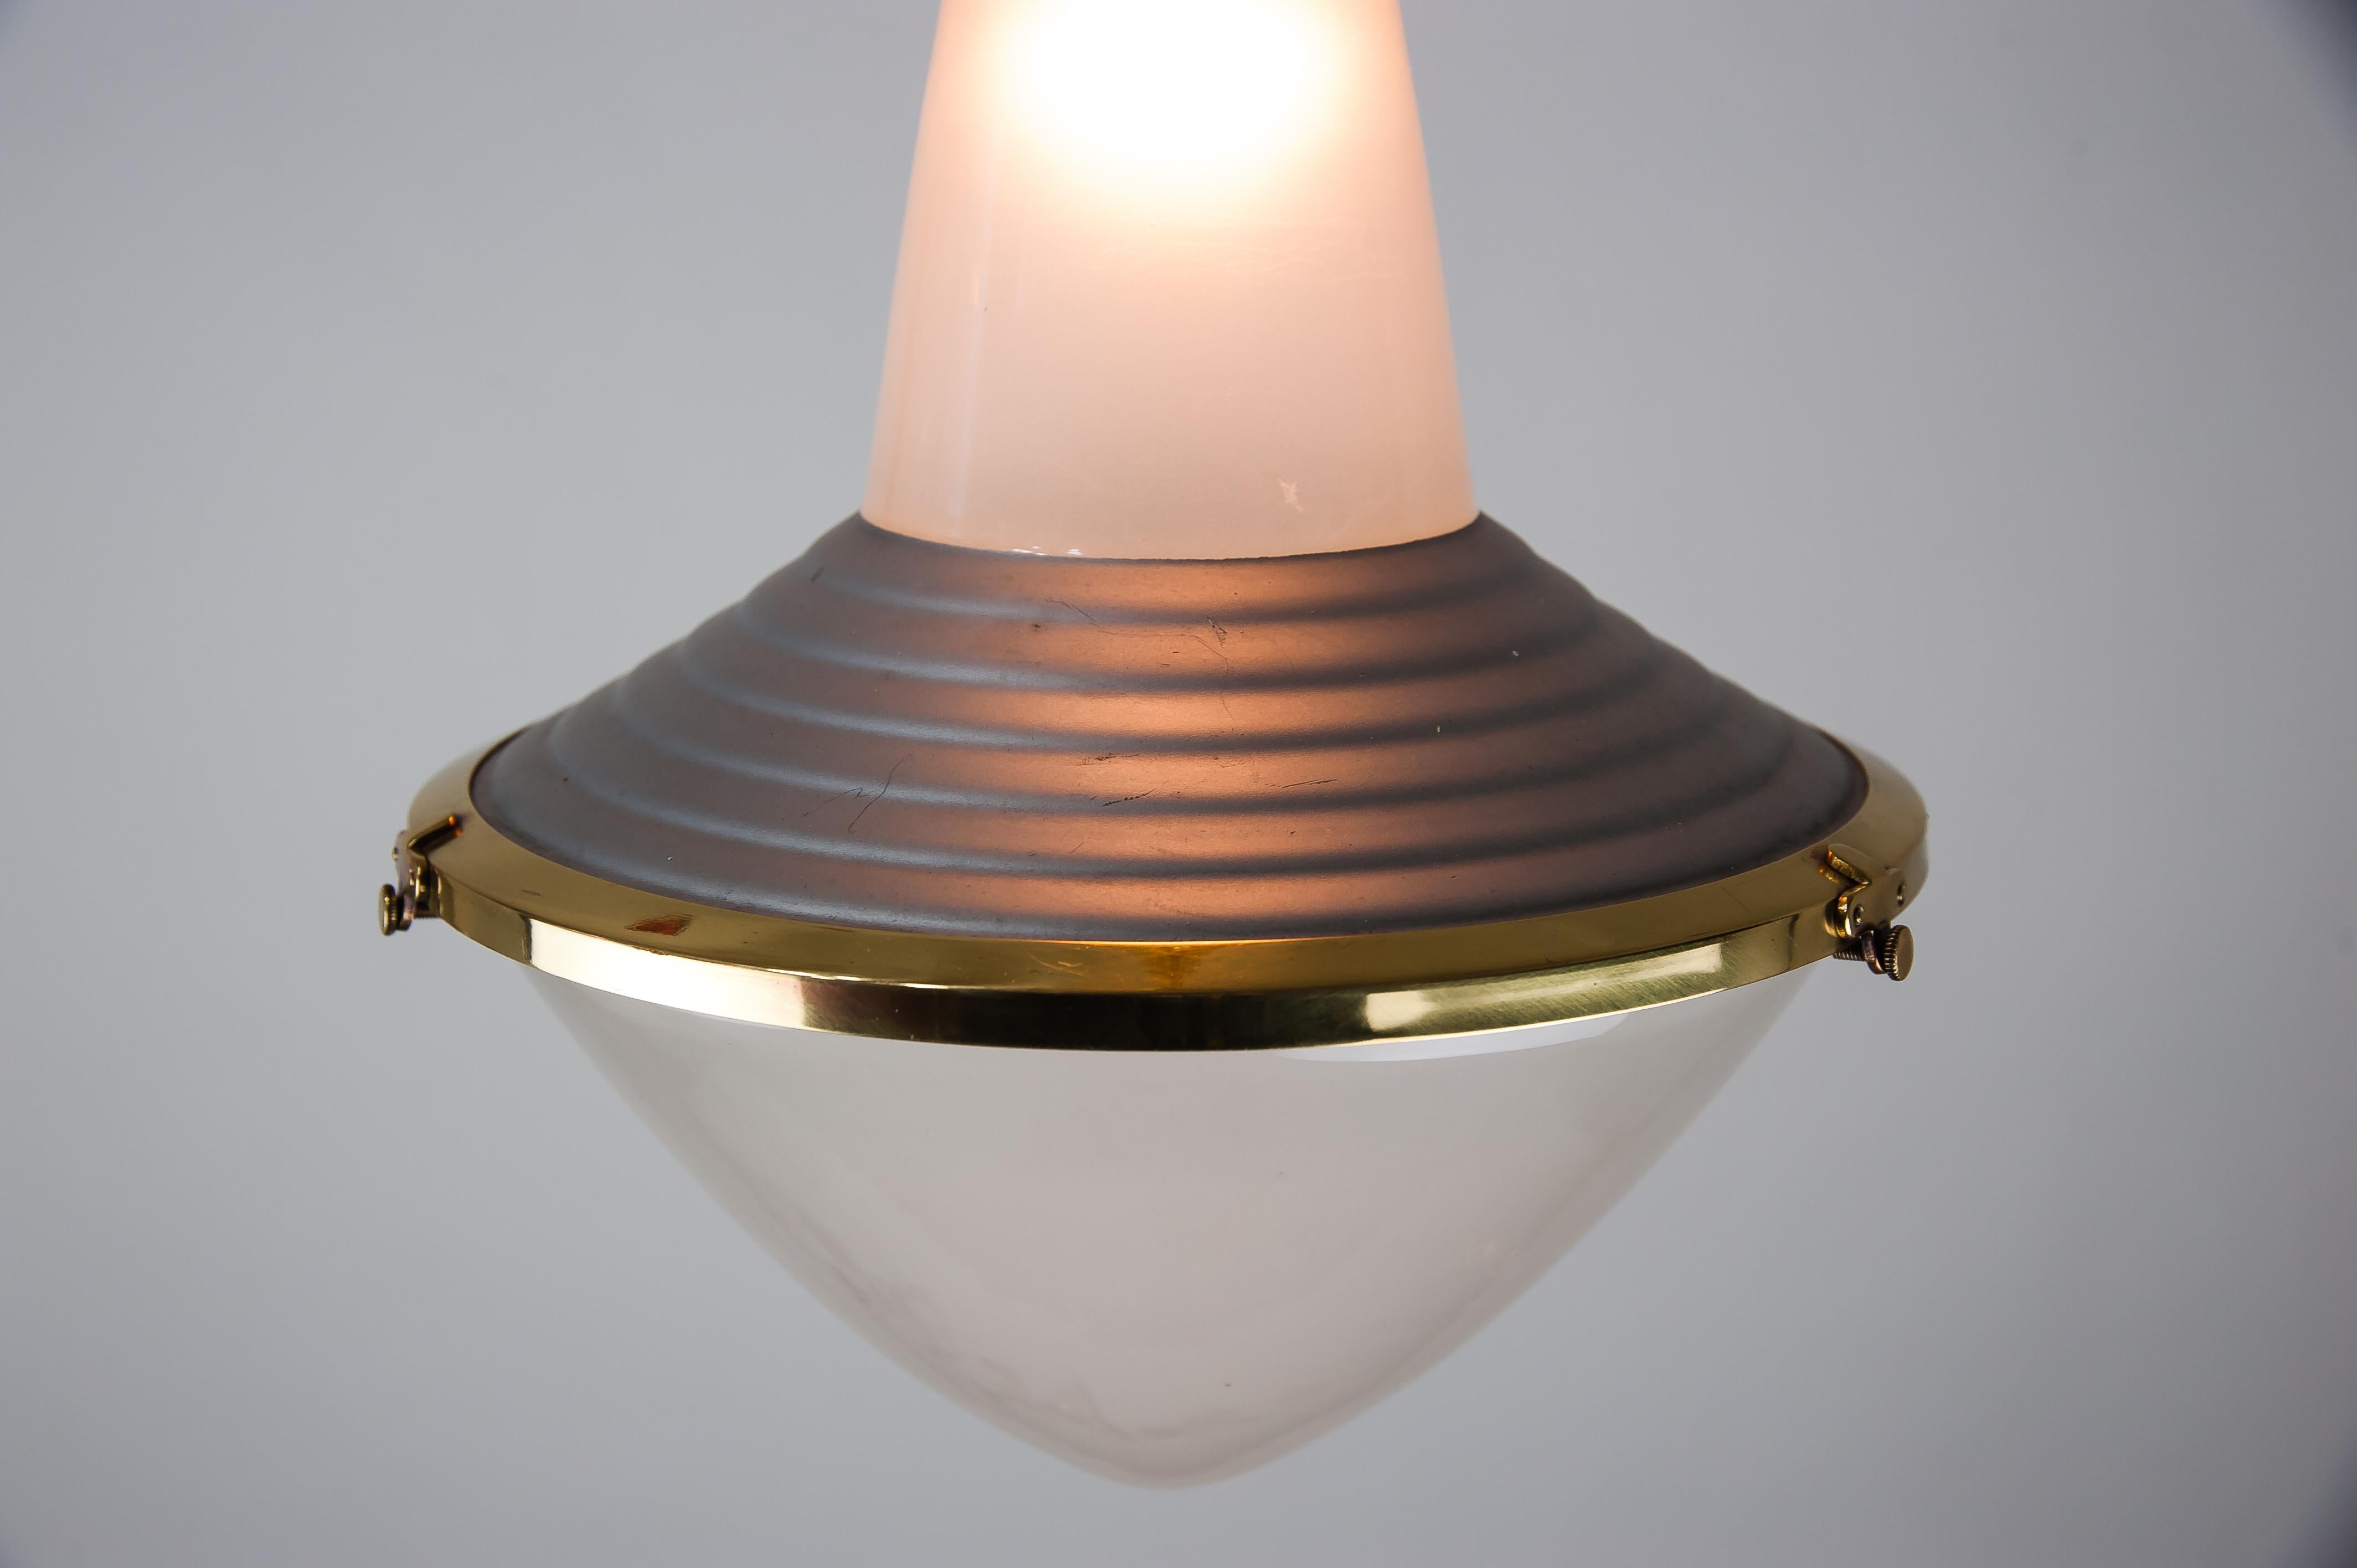 Zeiss Ikon by Adolf Meyer Bauhaus Art Deco Lamp, Germany, circa 1930s For Sale 1